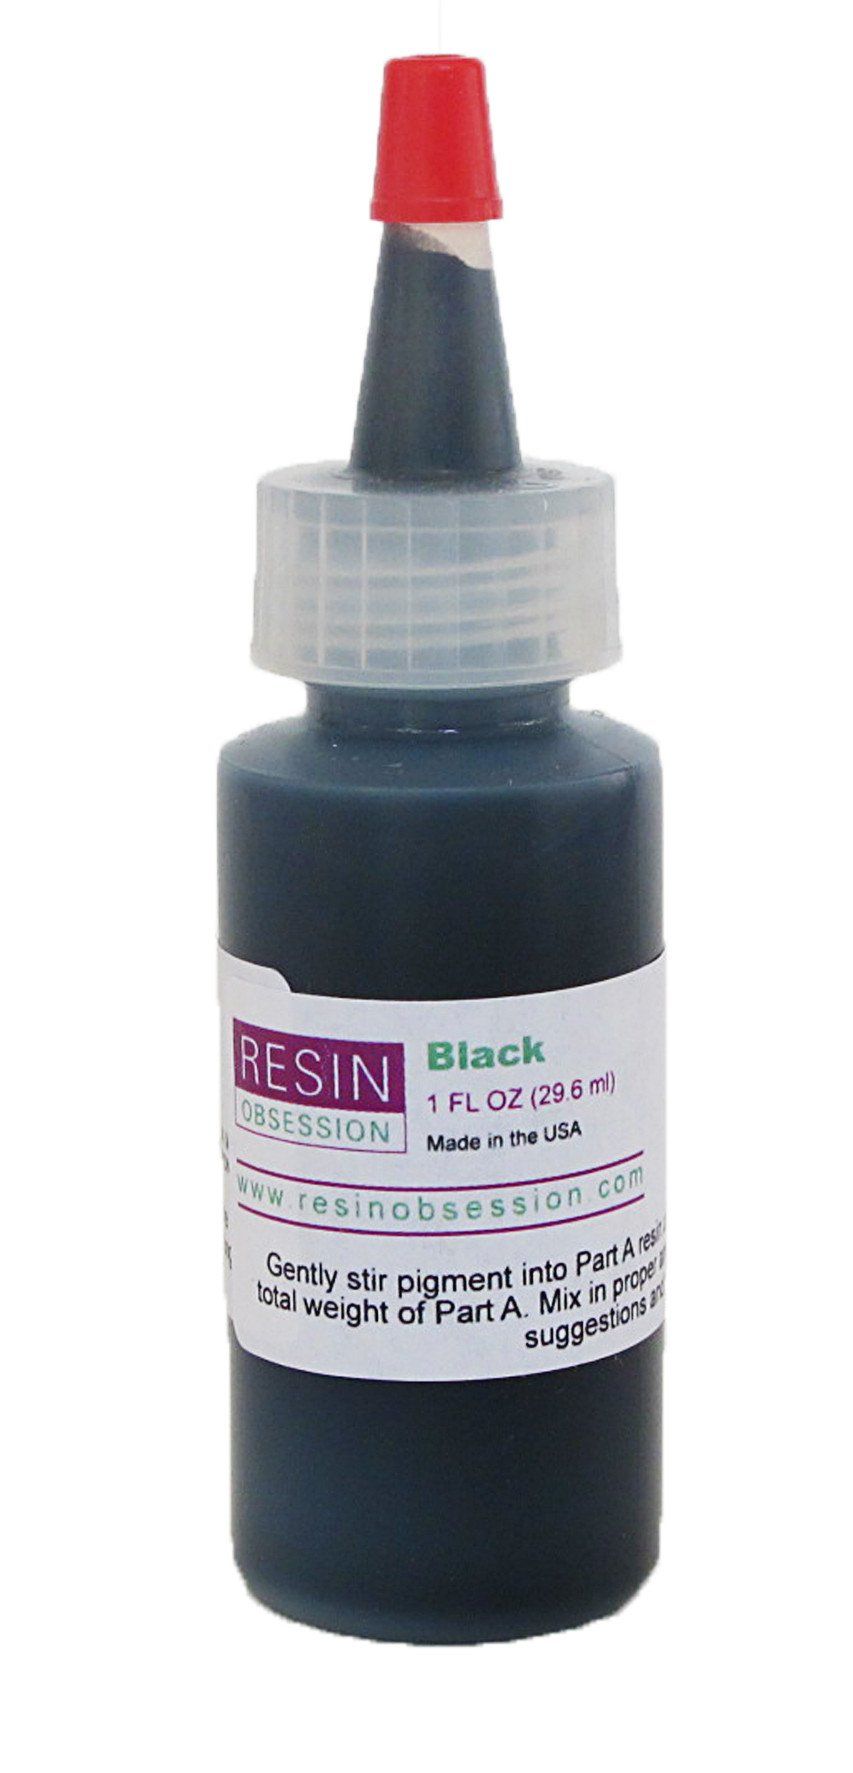 White Opaque Pigment for Resin & Epoxy